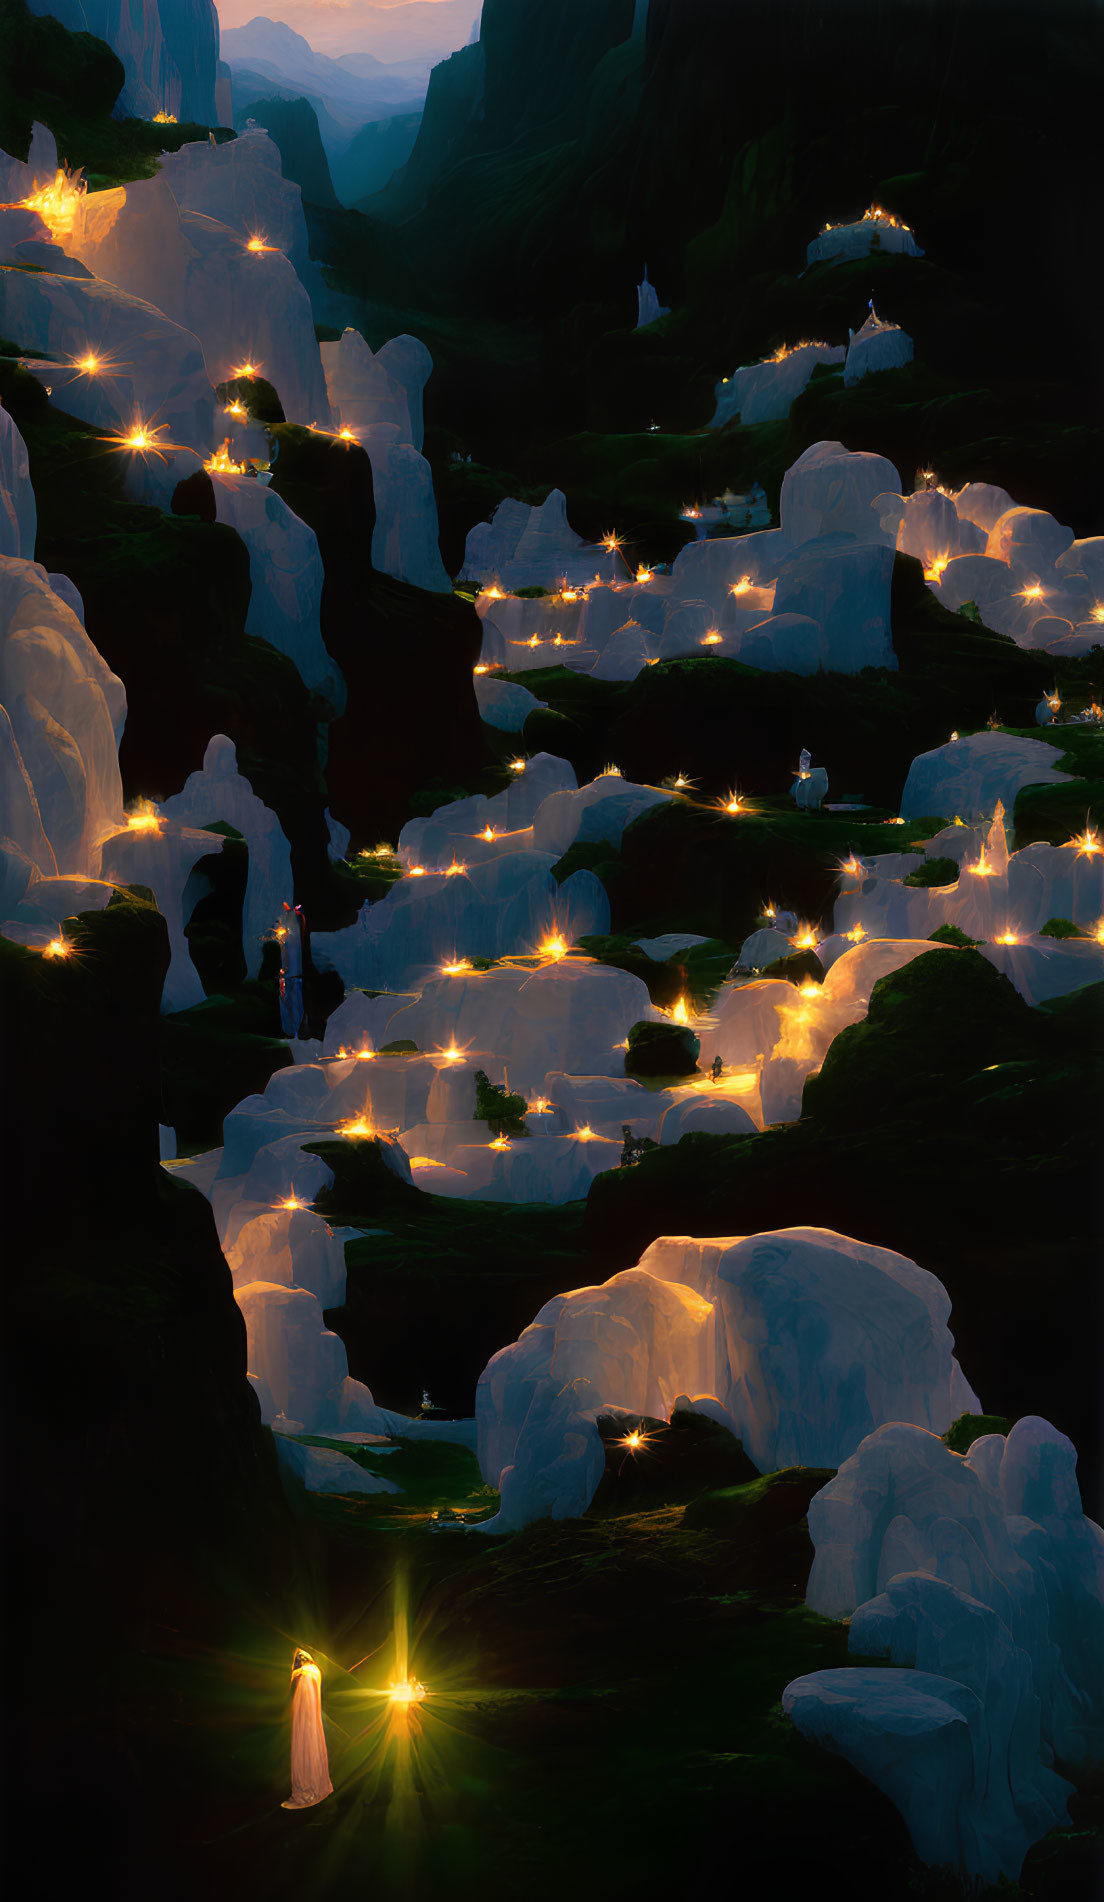 Mystical landscape with glowing lights and rock formations at night